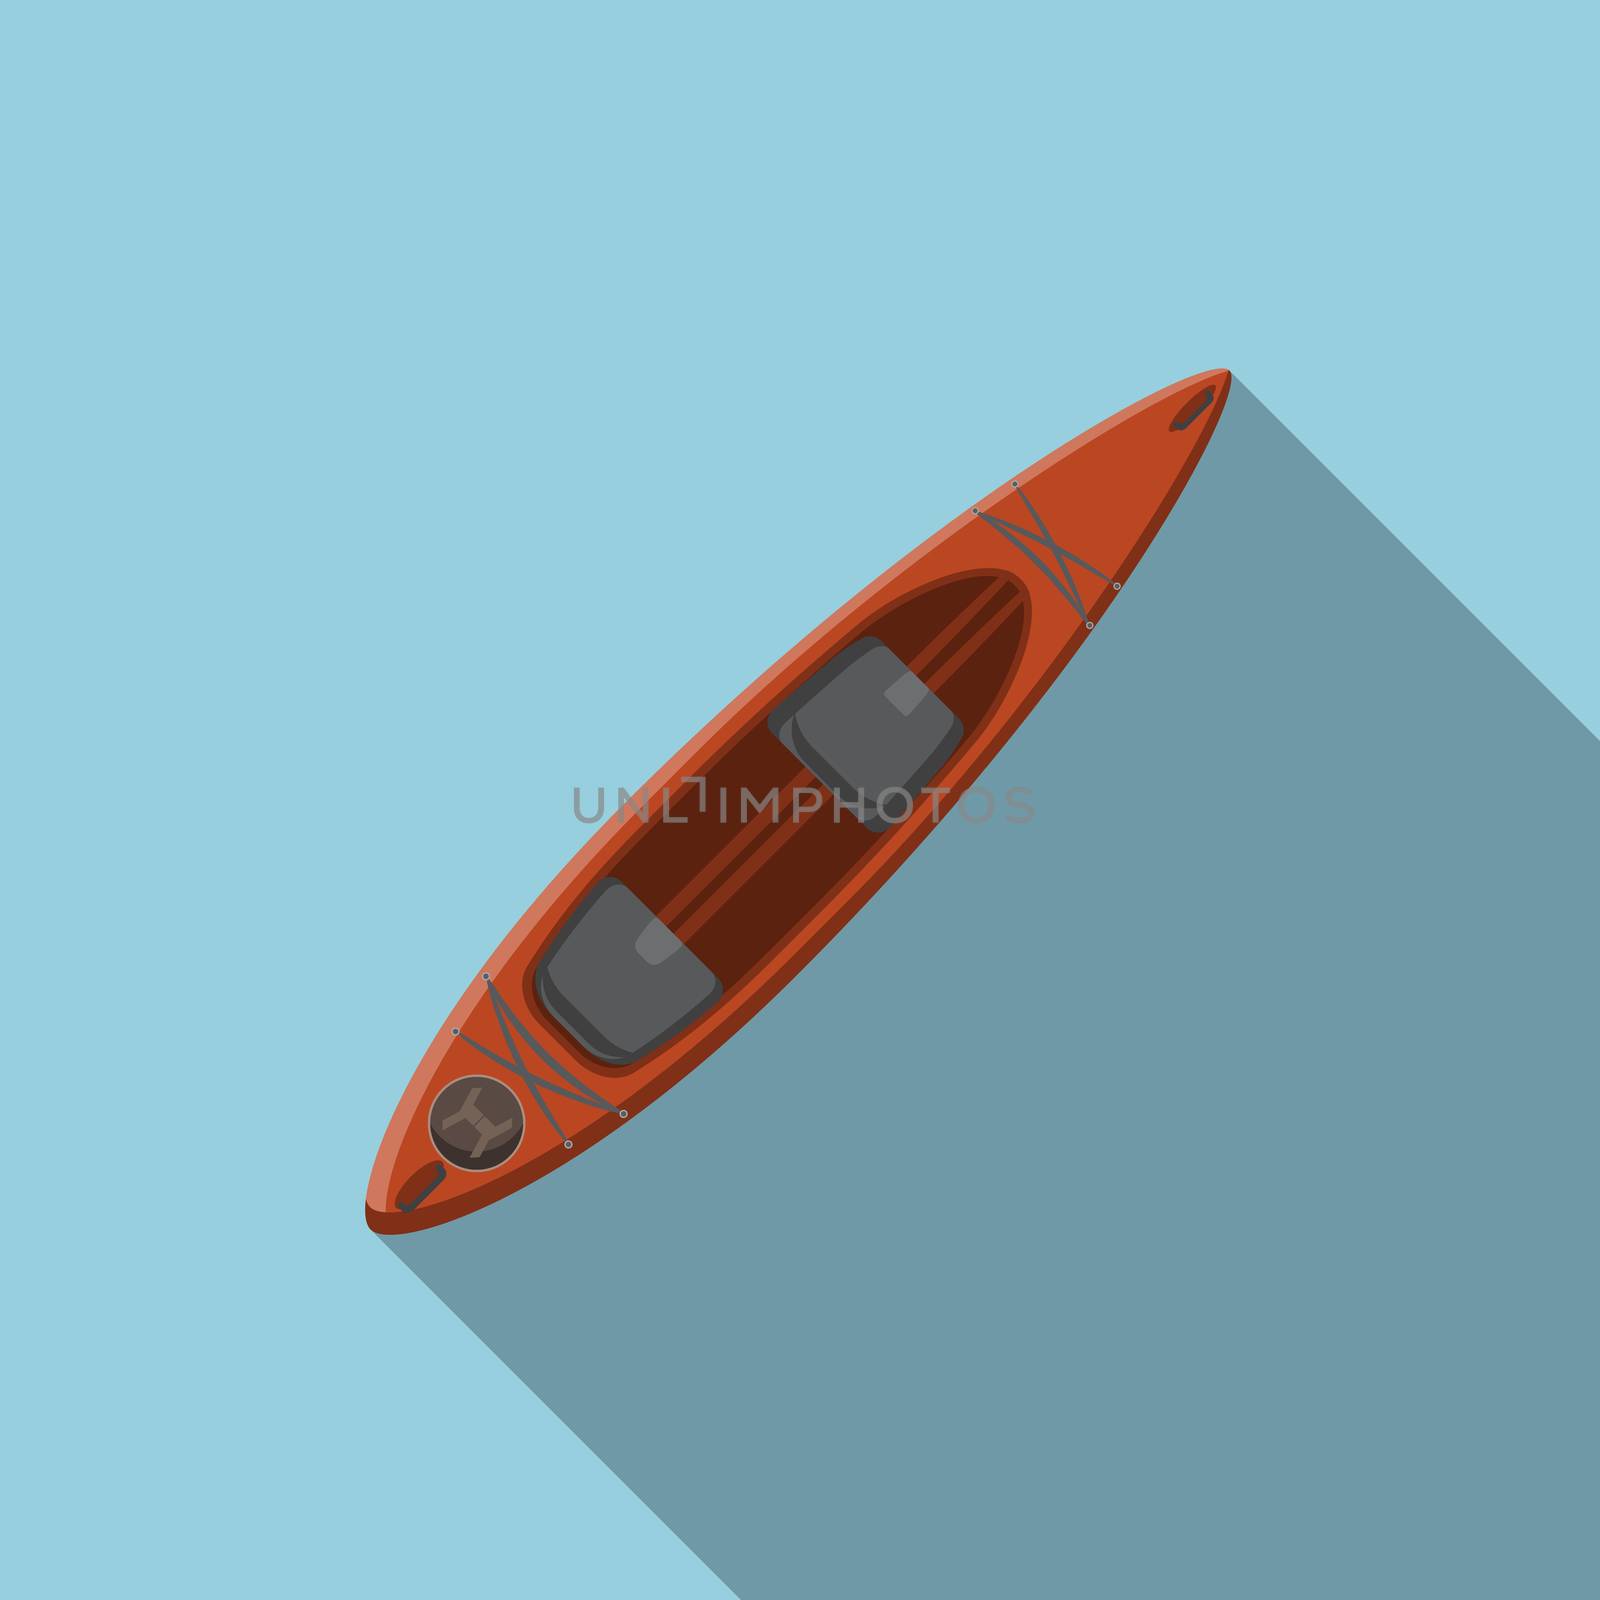 Flat design modern vector illustration of kayak icon, camping, hiking and extreme sports equipment with long shadow.